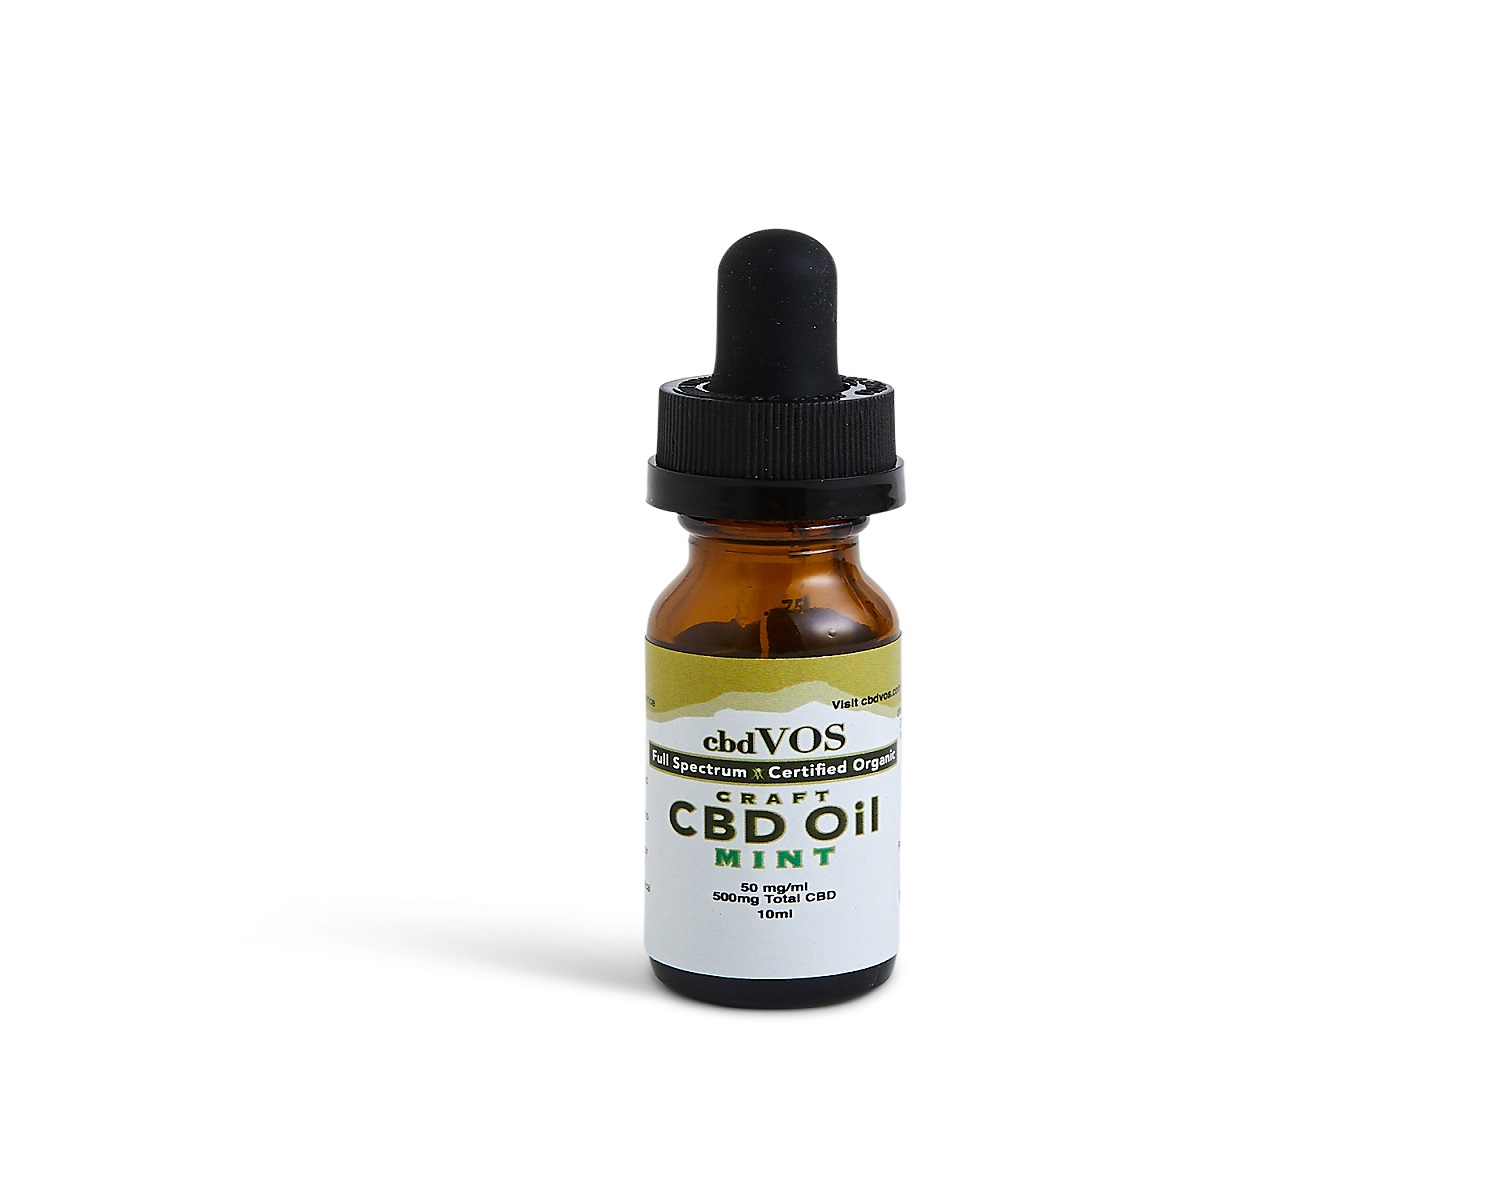  How long does CBD oil take to work? How long does CBD stay in your system?